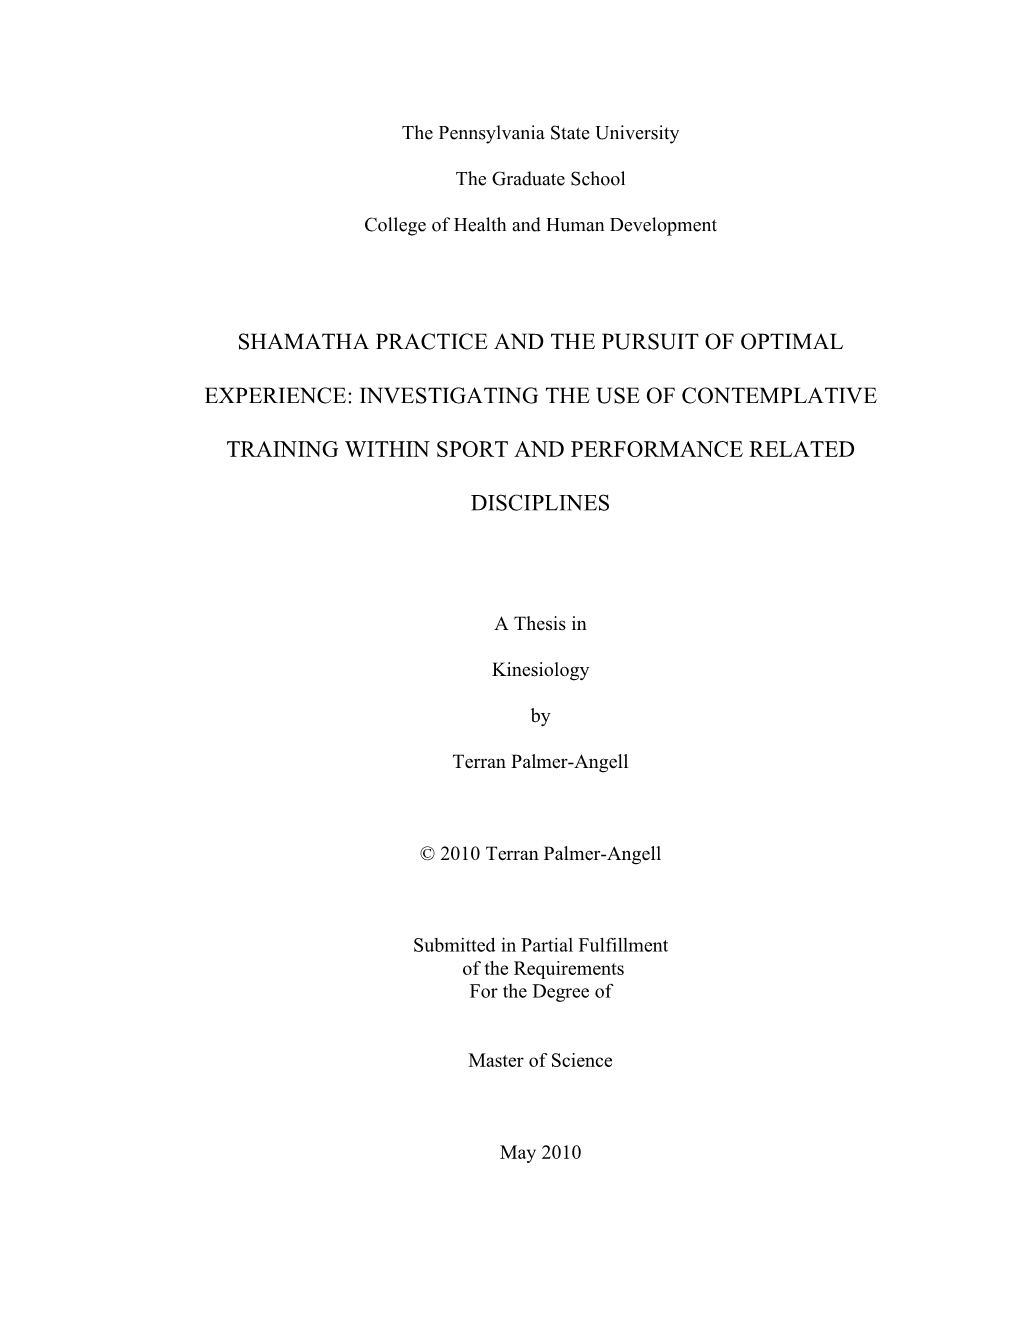 Terran Palmer-Angell Masters Thesis Final Copy